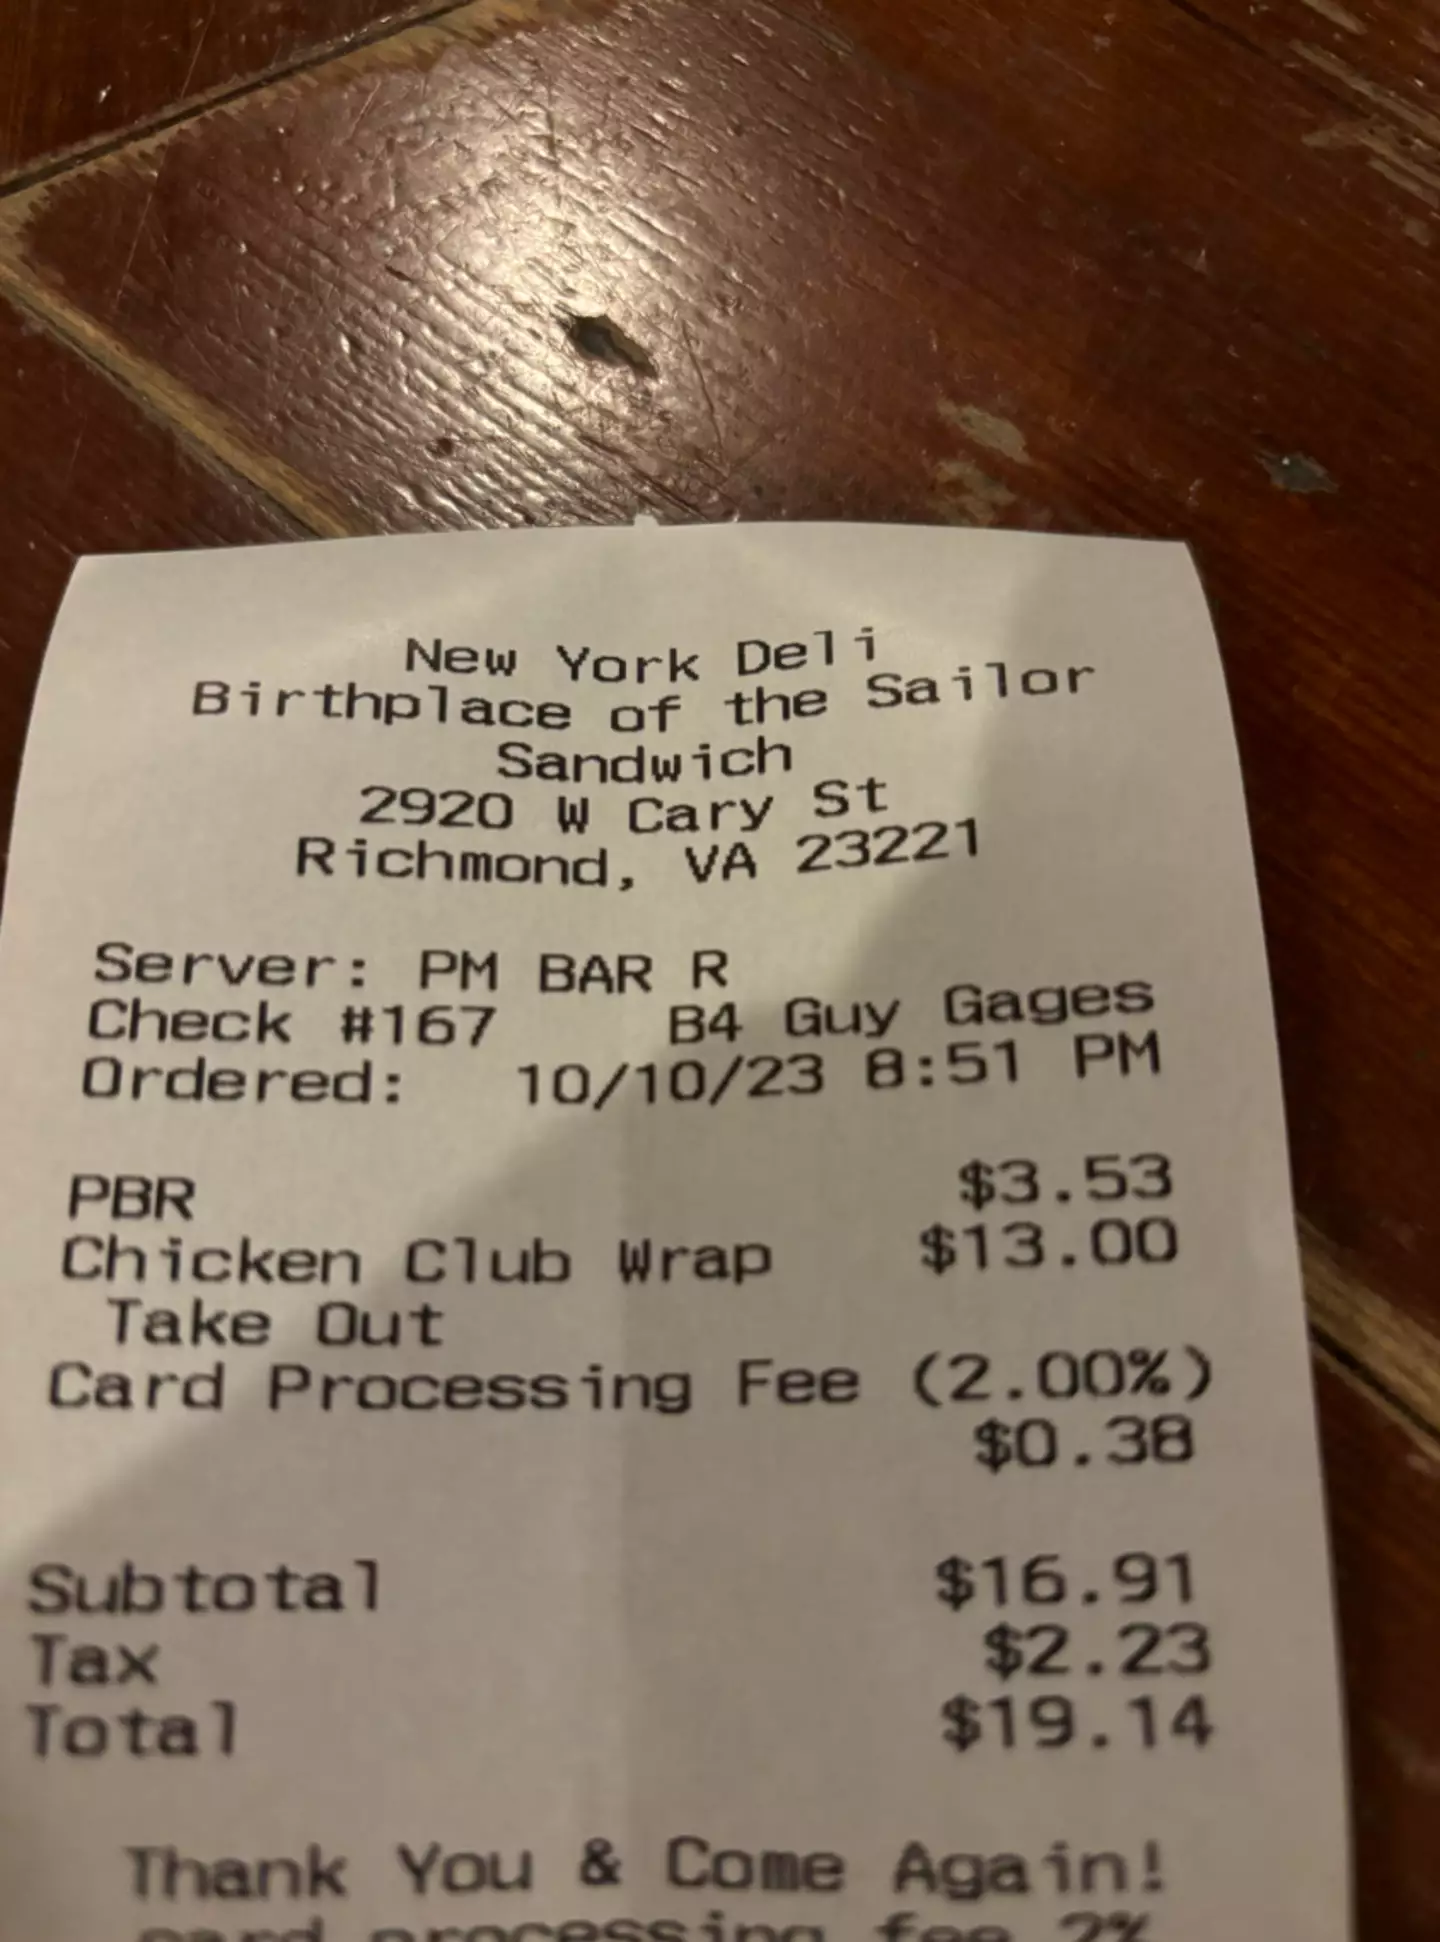 The receipt shows the extra charge being added on.